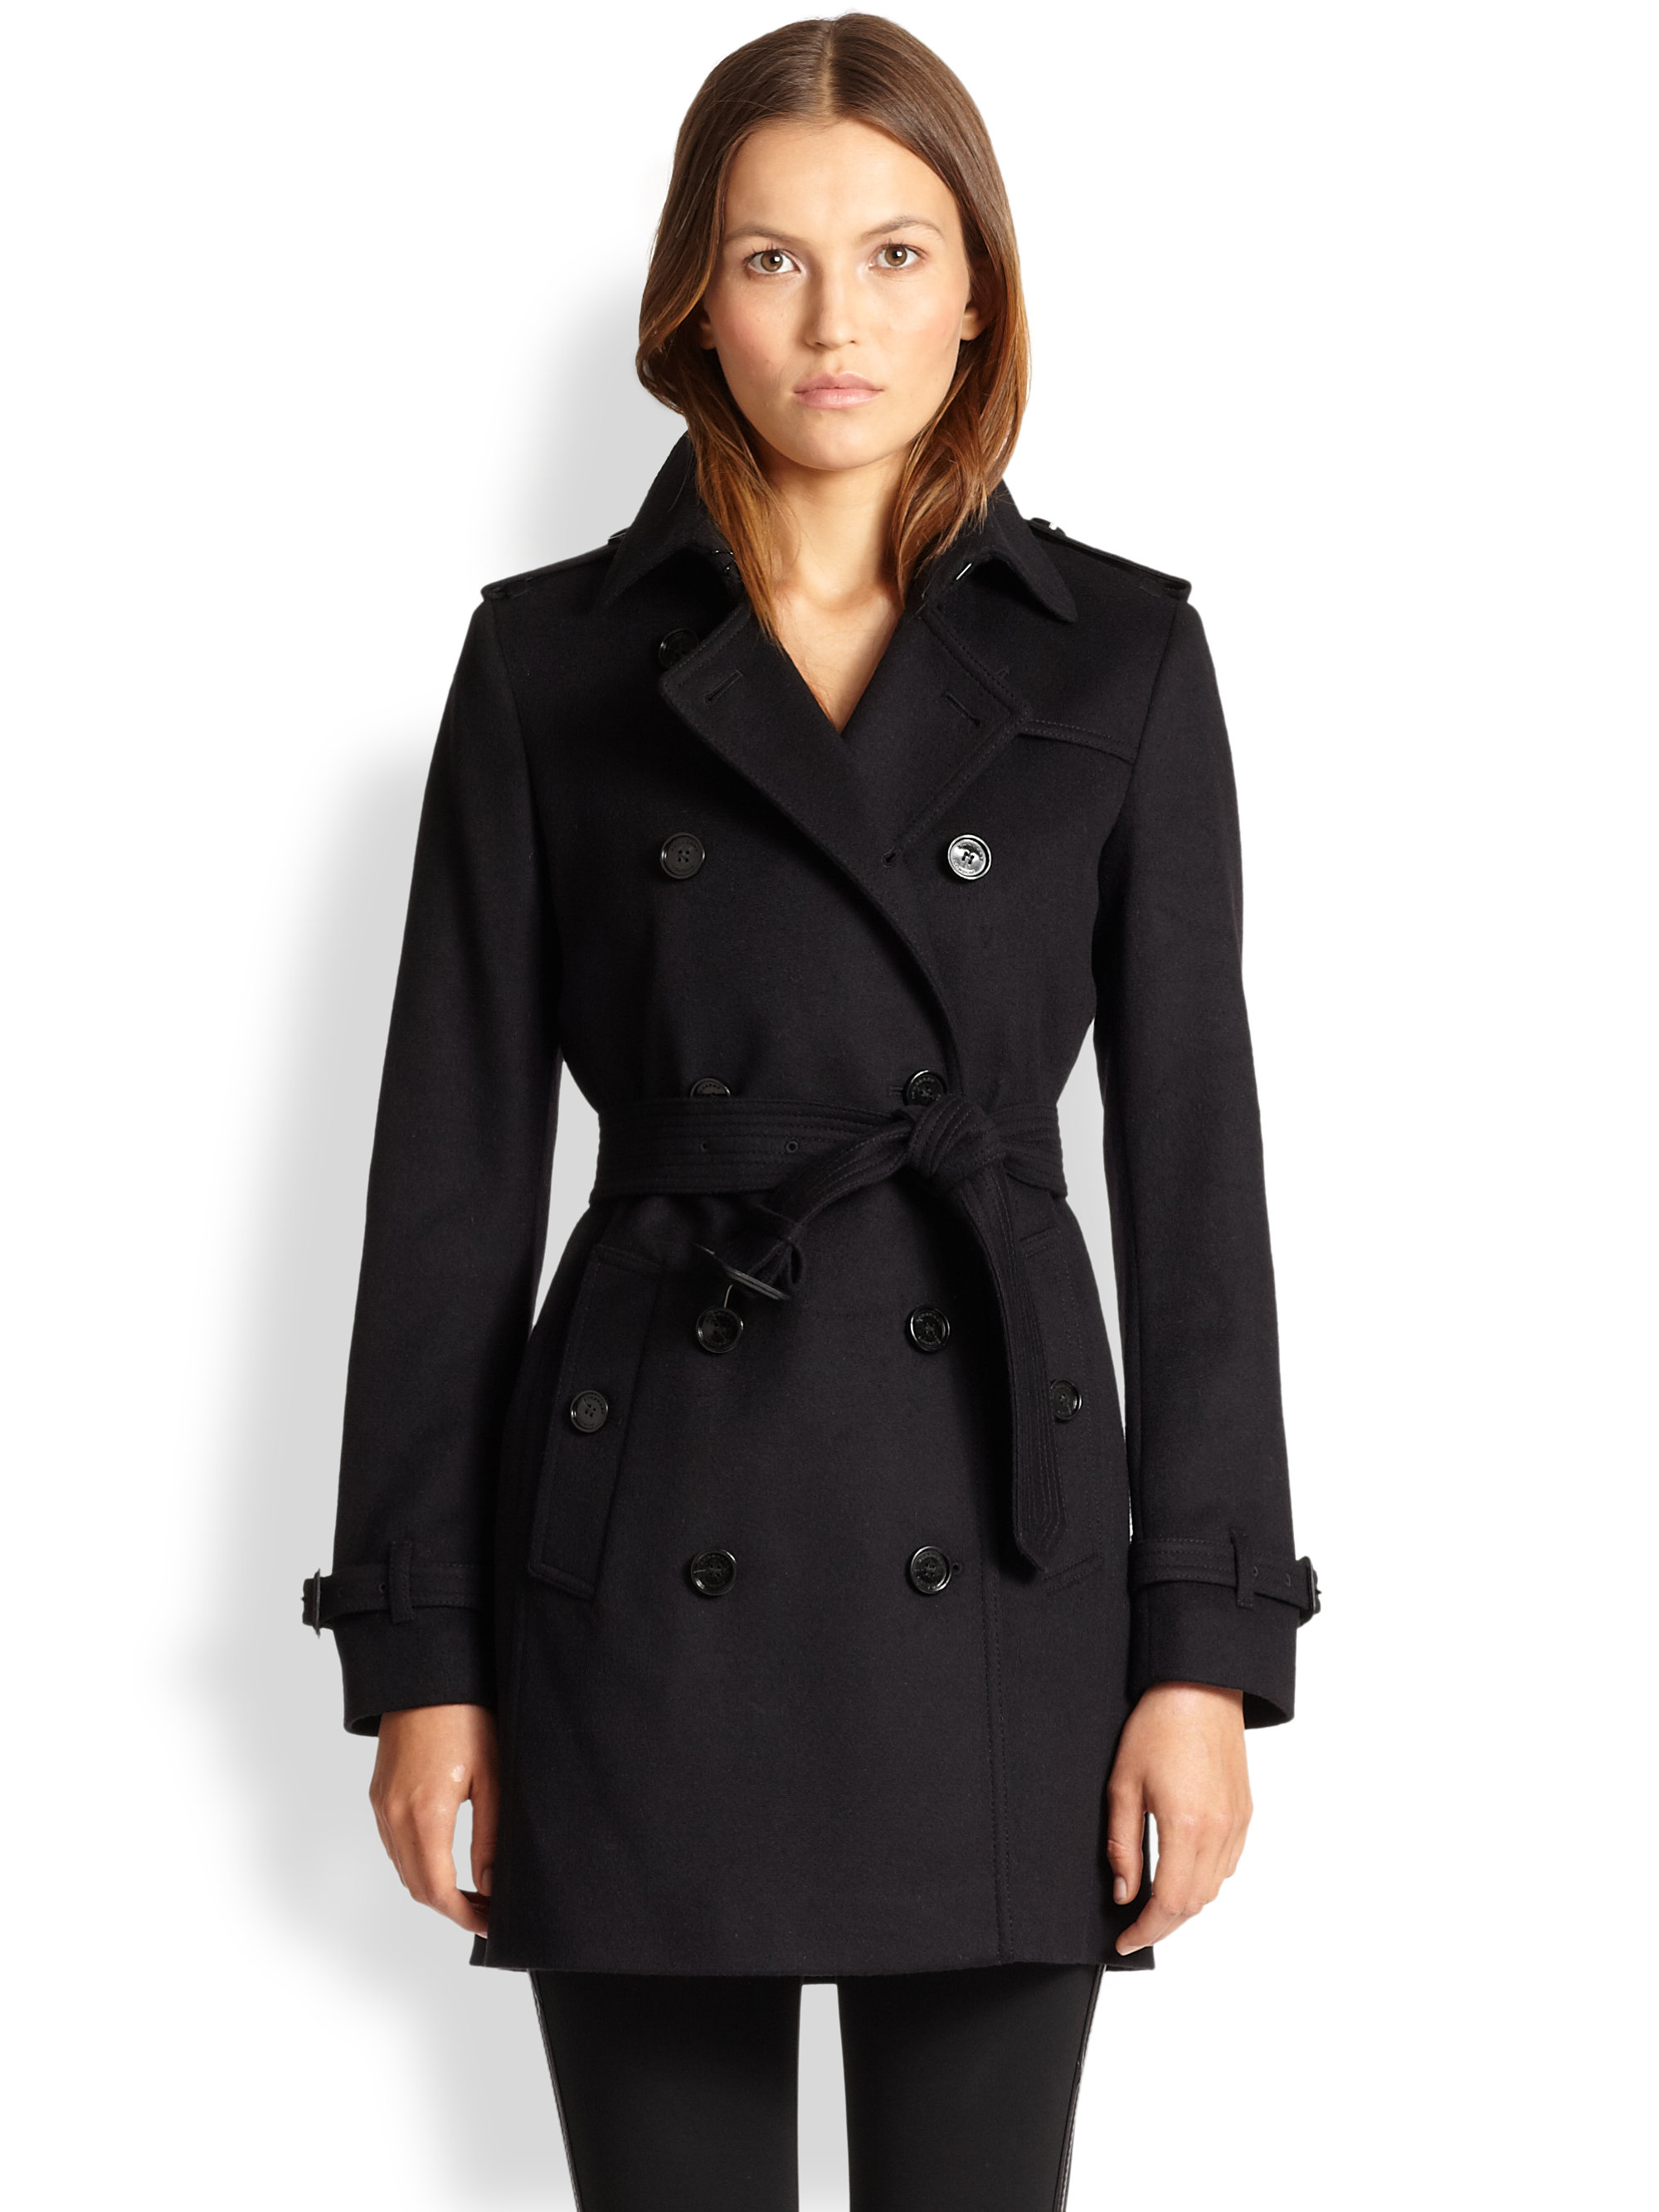 forråde nøgle Booth Burberry Kensington Wool & Cashmere Trench Coat in Black - Lyst